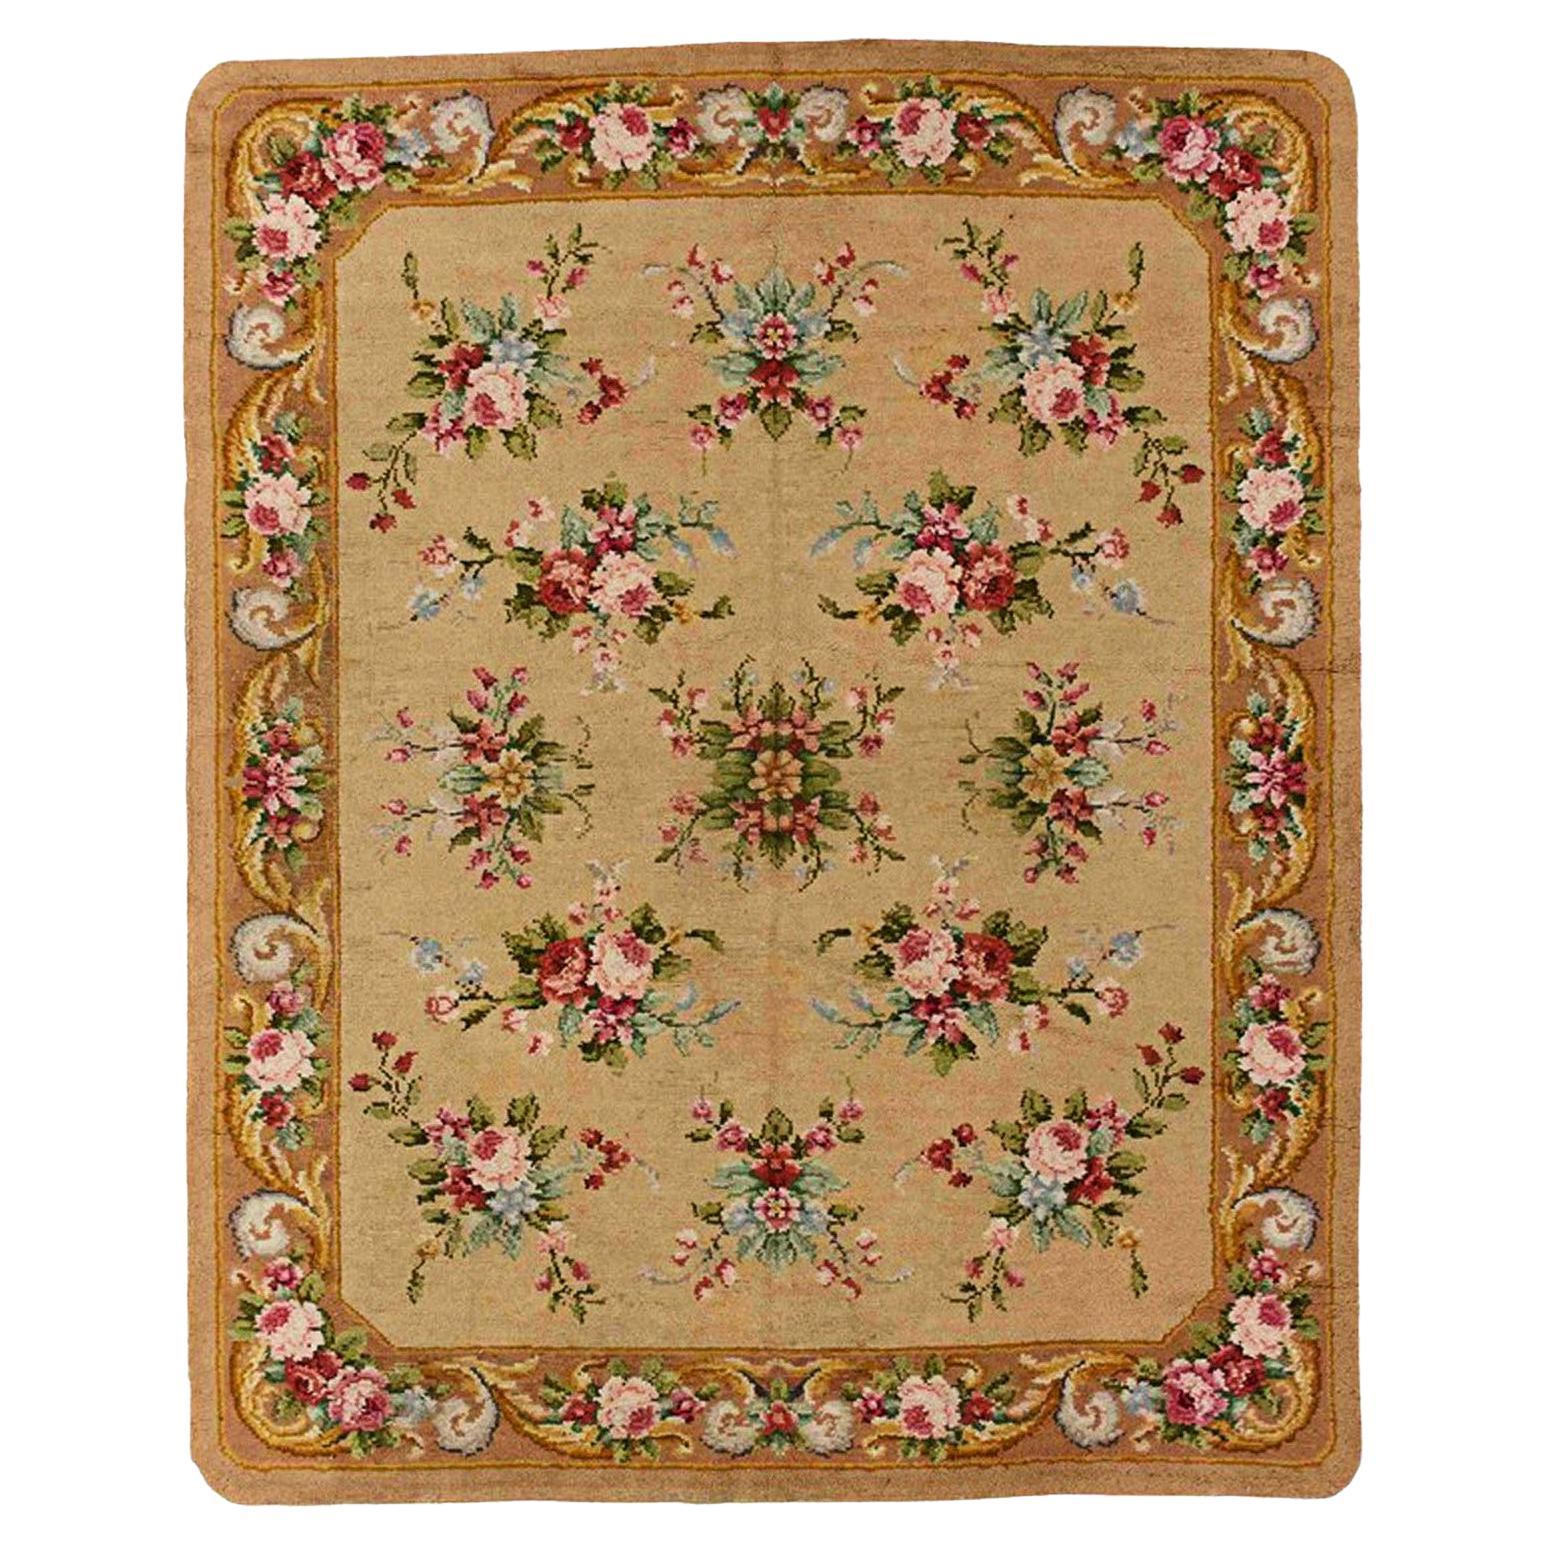 20th Century, Brown and Floreal Motifs Savonerie French Rug, ca 1920 For Sale